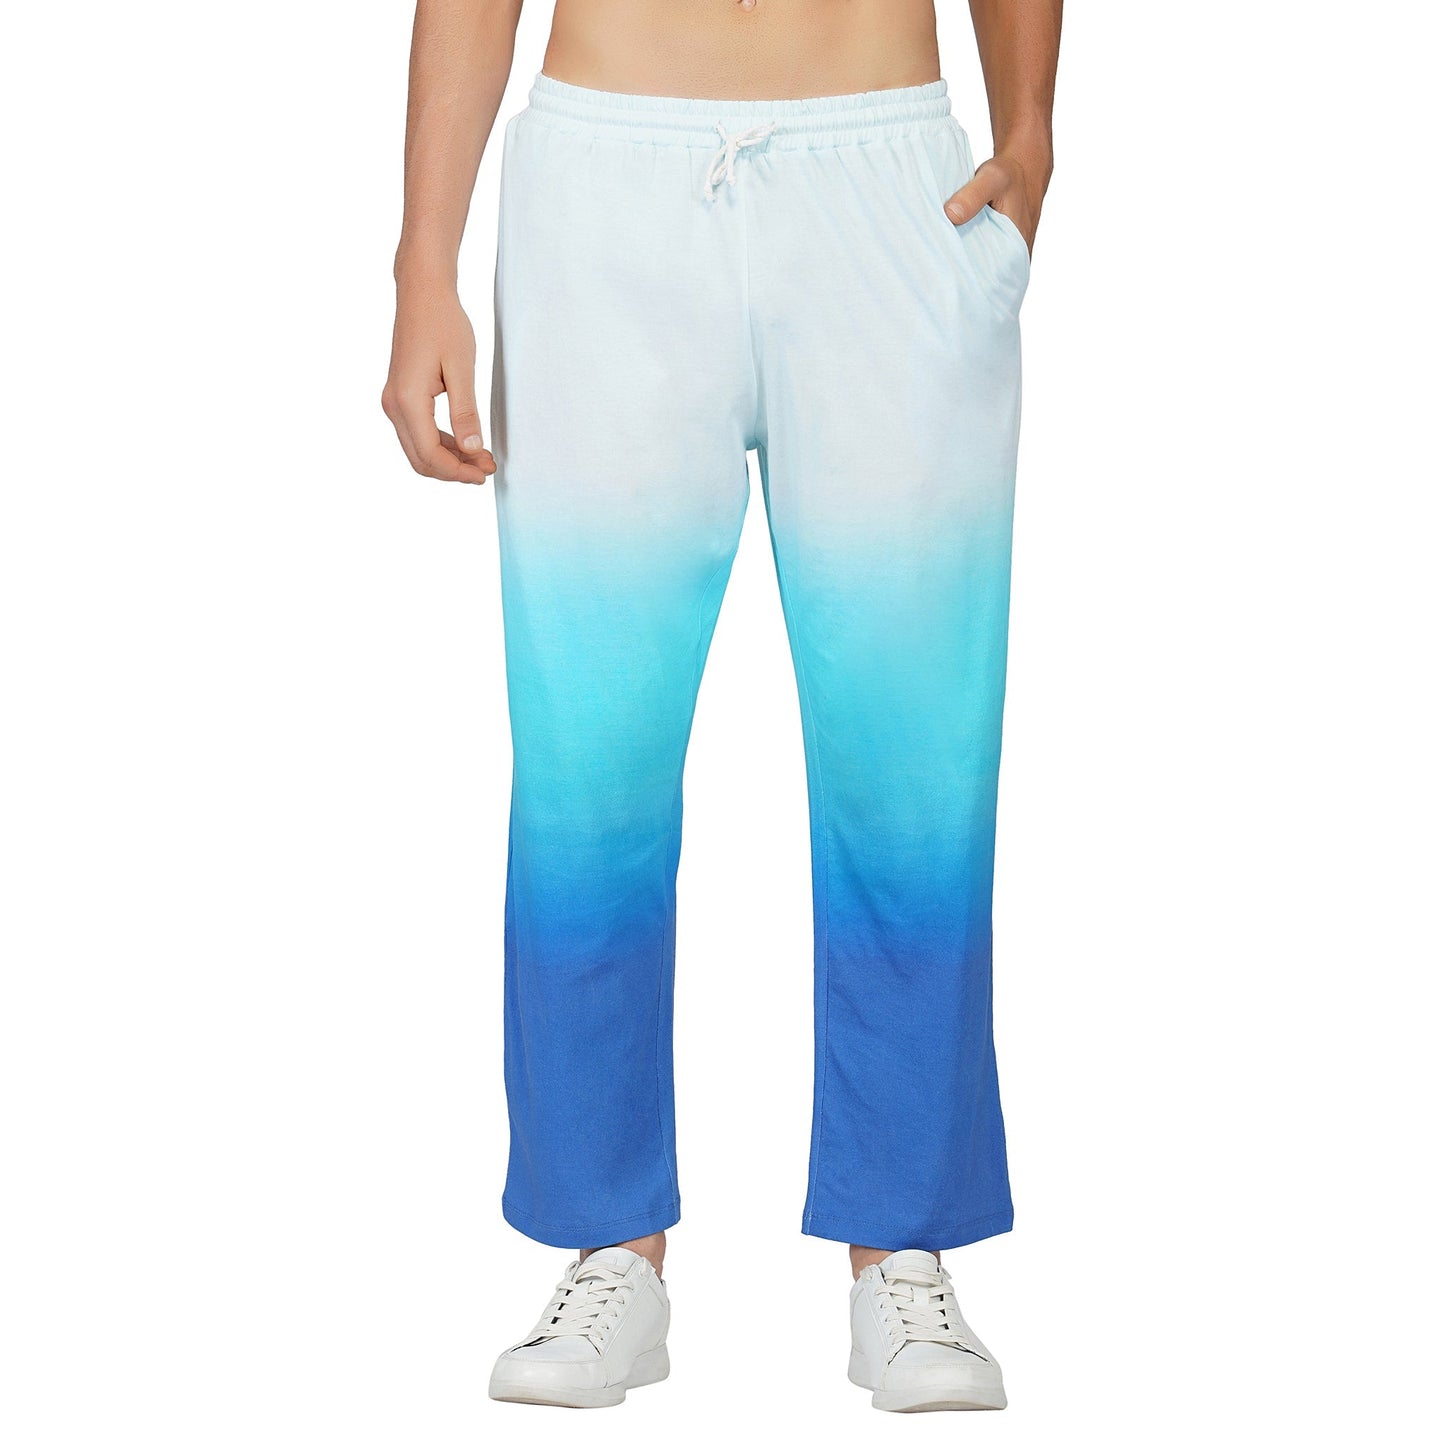 SLAY. Men's White to Blue Ombre Pants